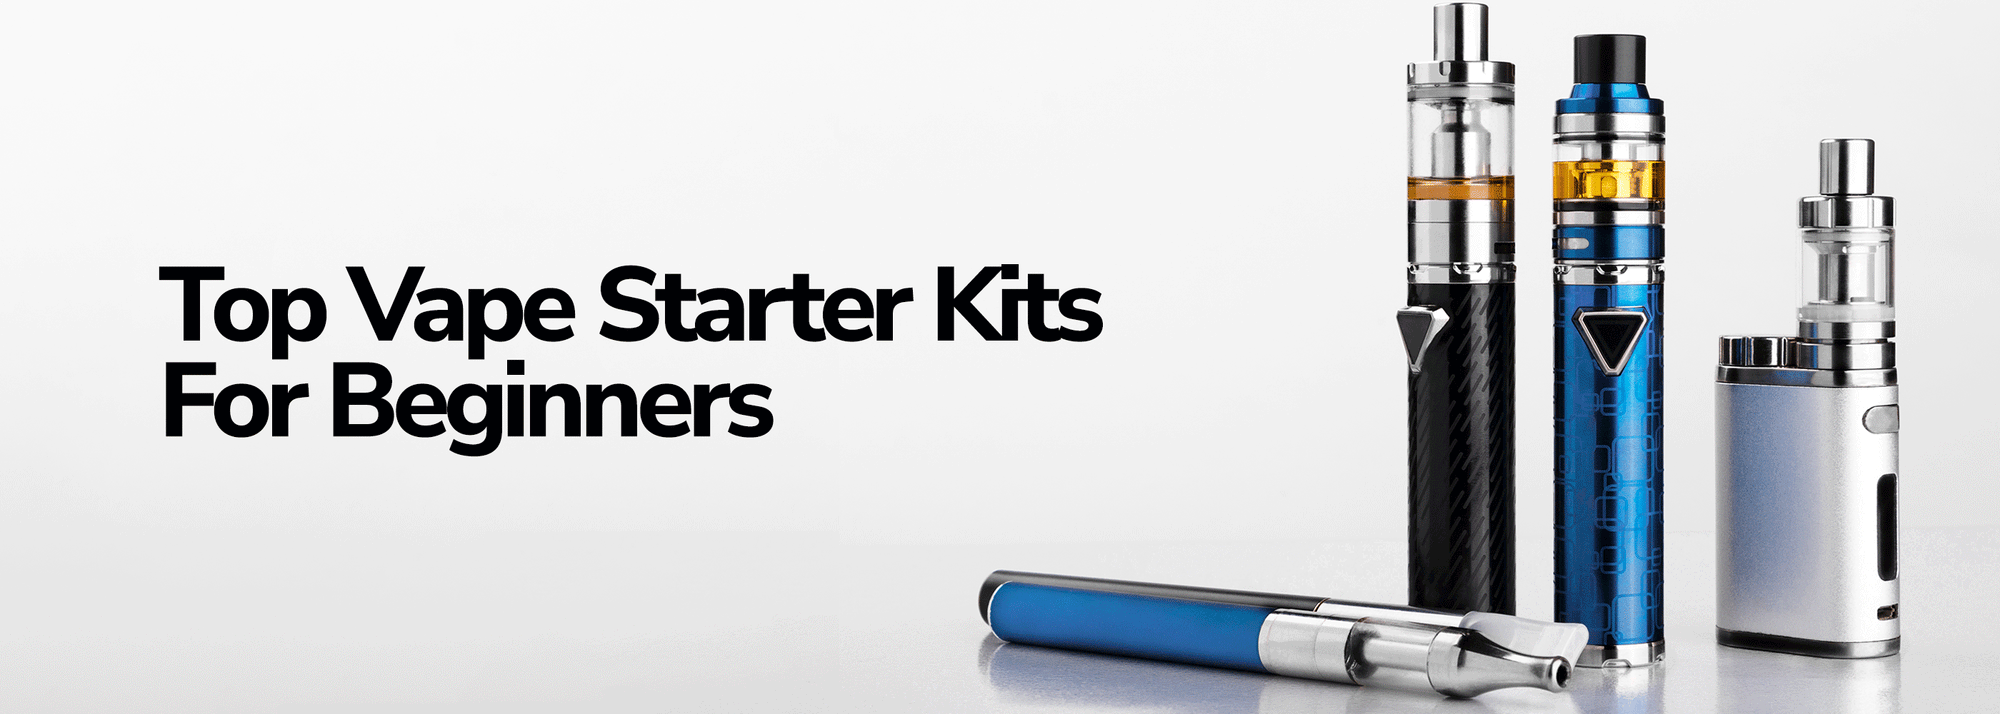 Top Vape Starter Kits For Beginners - Wick and Wire Co Melbourne Vape Shop, Victoria Australia